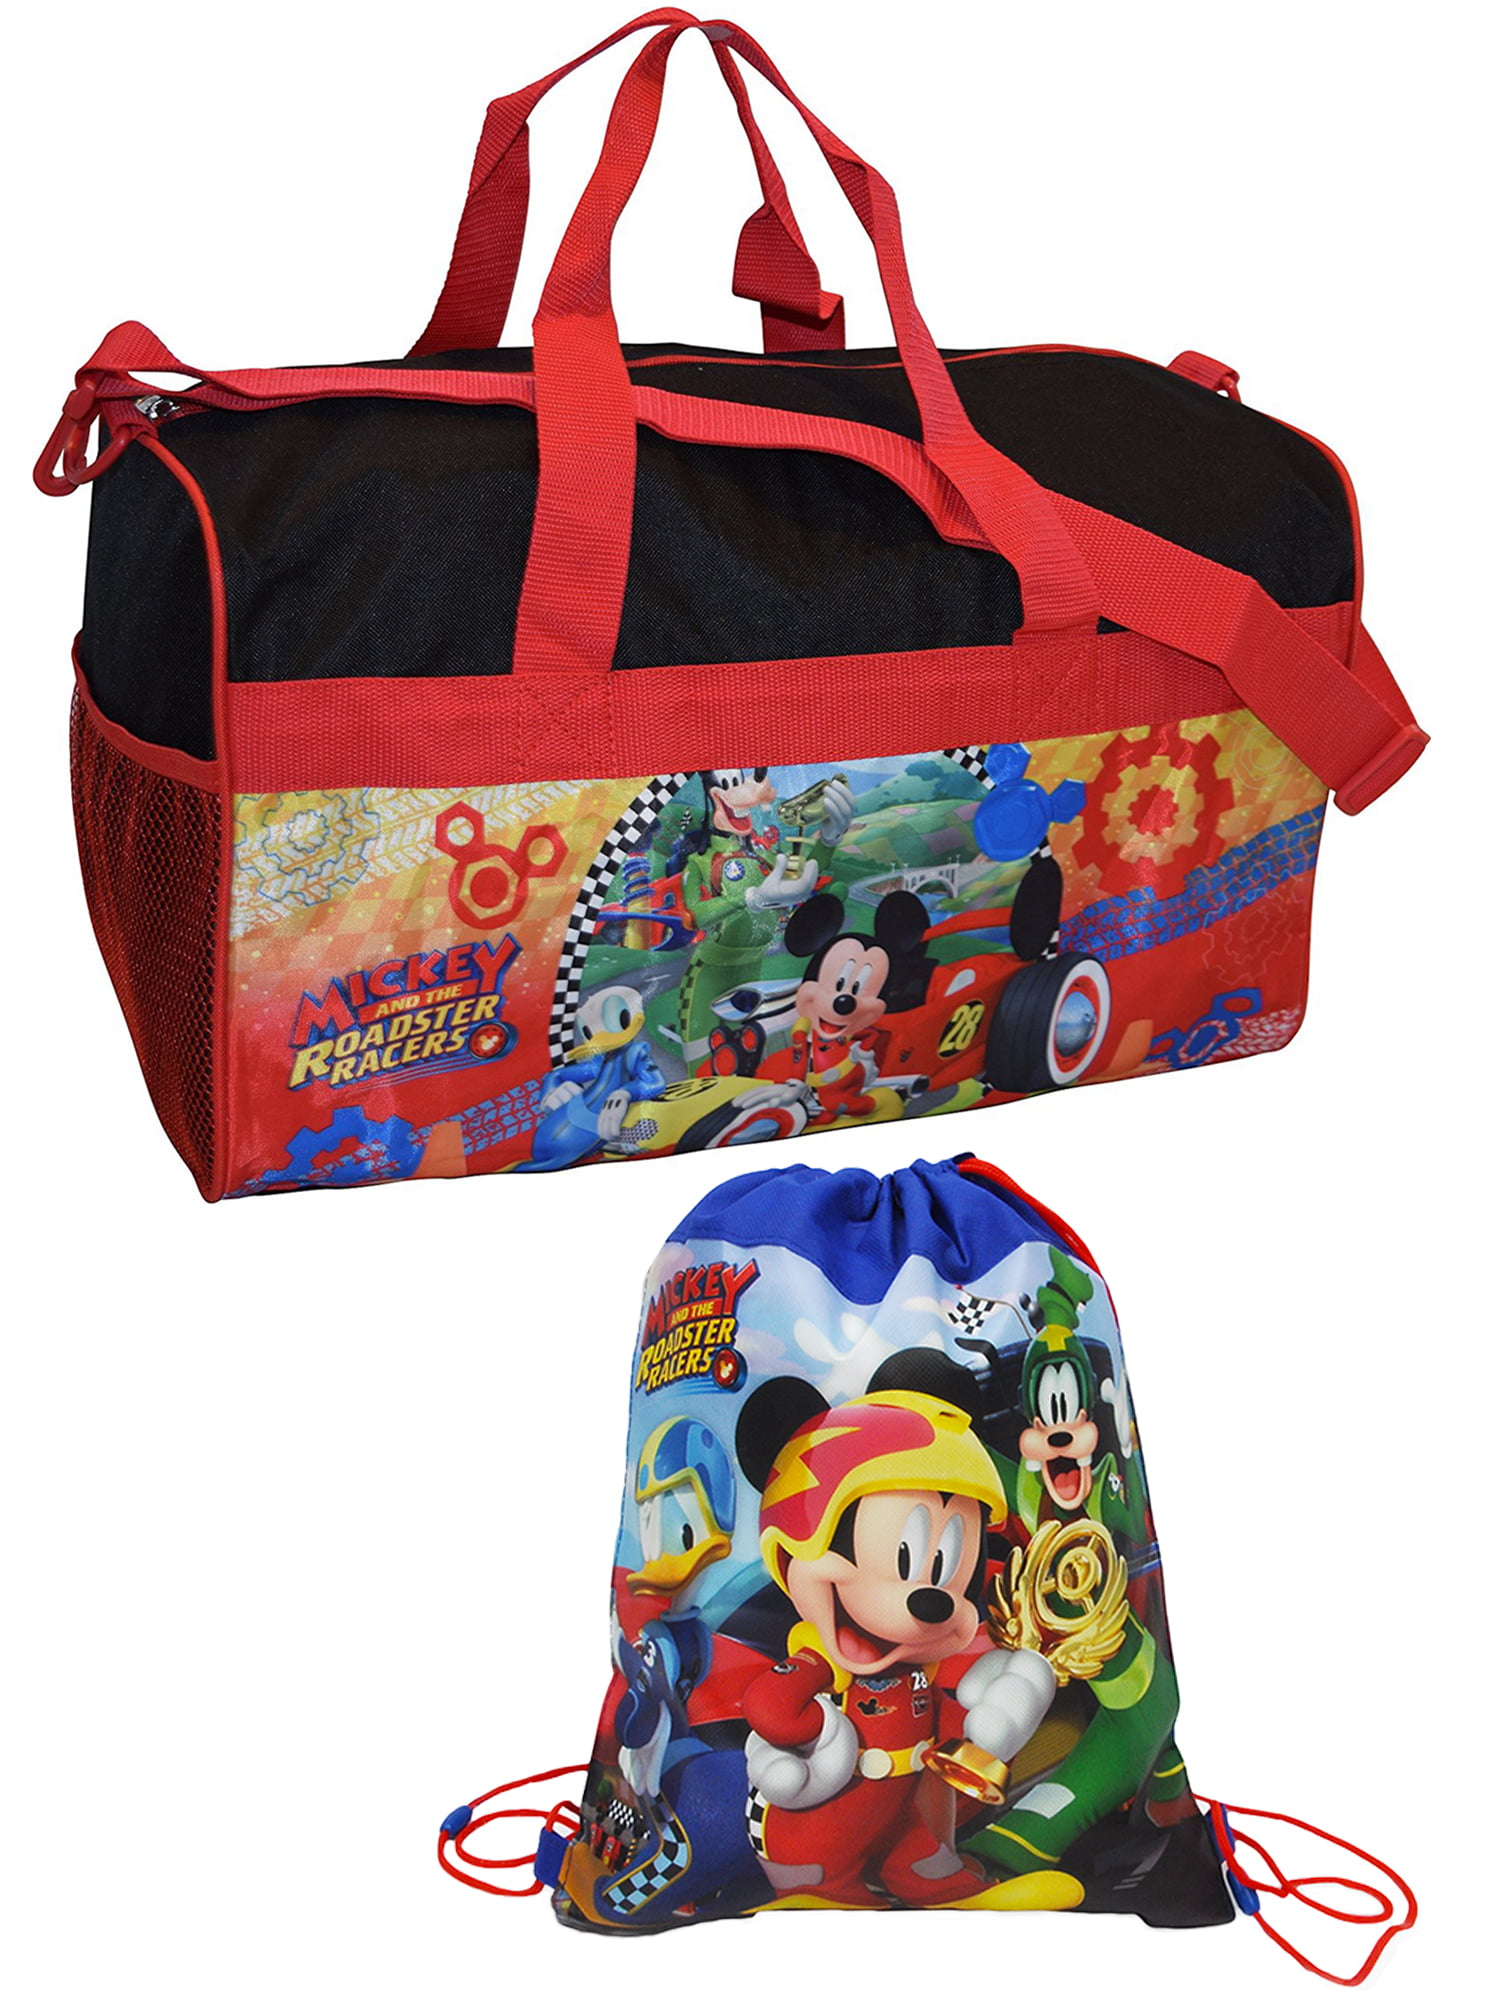 Disney Mickey Minnie Non-Woven Drawstring Bag Backpack For Kids Gift AAA